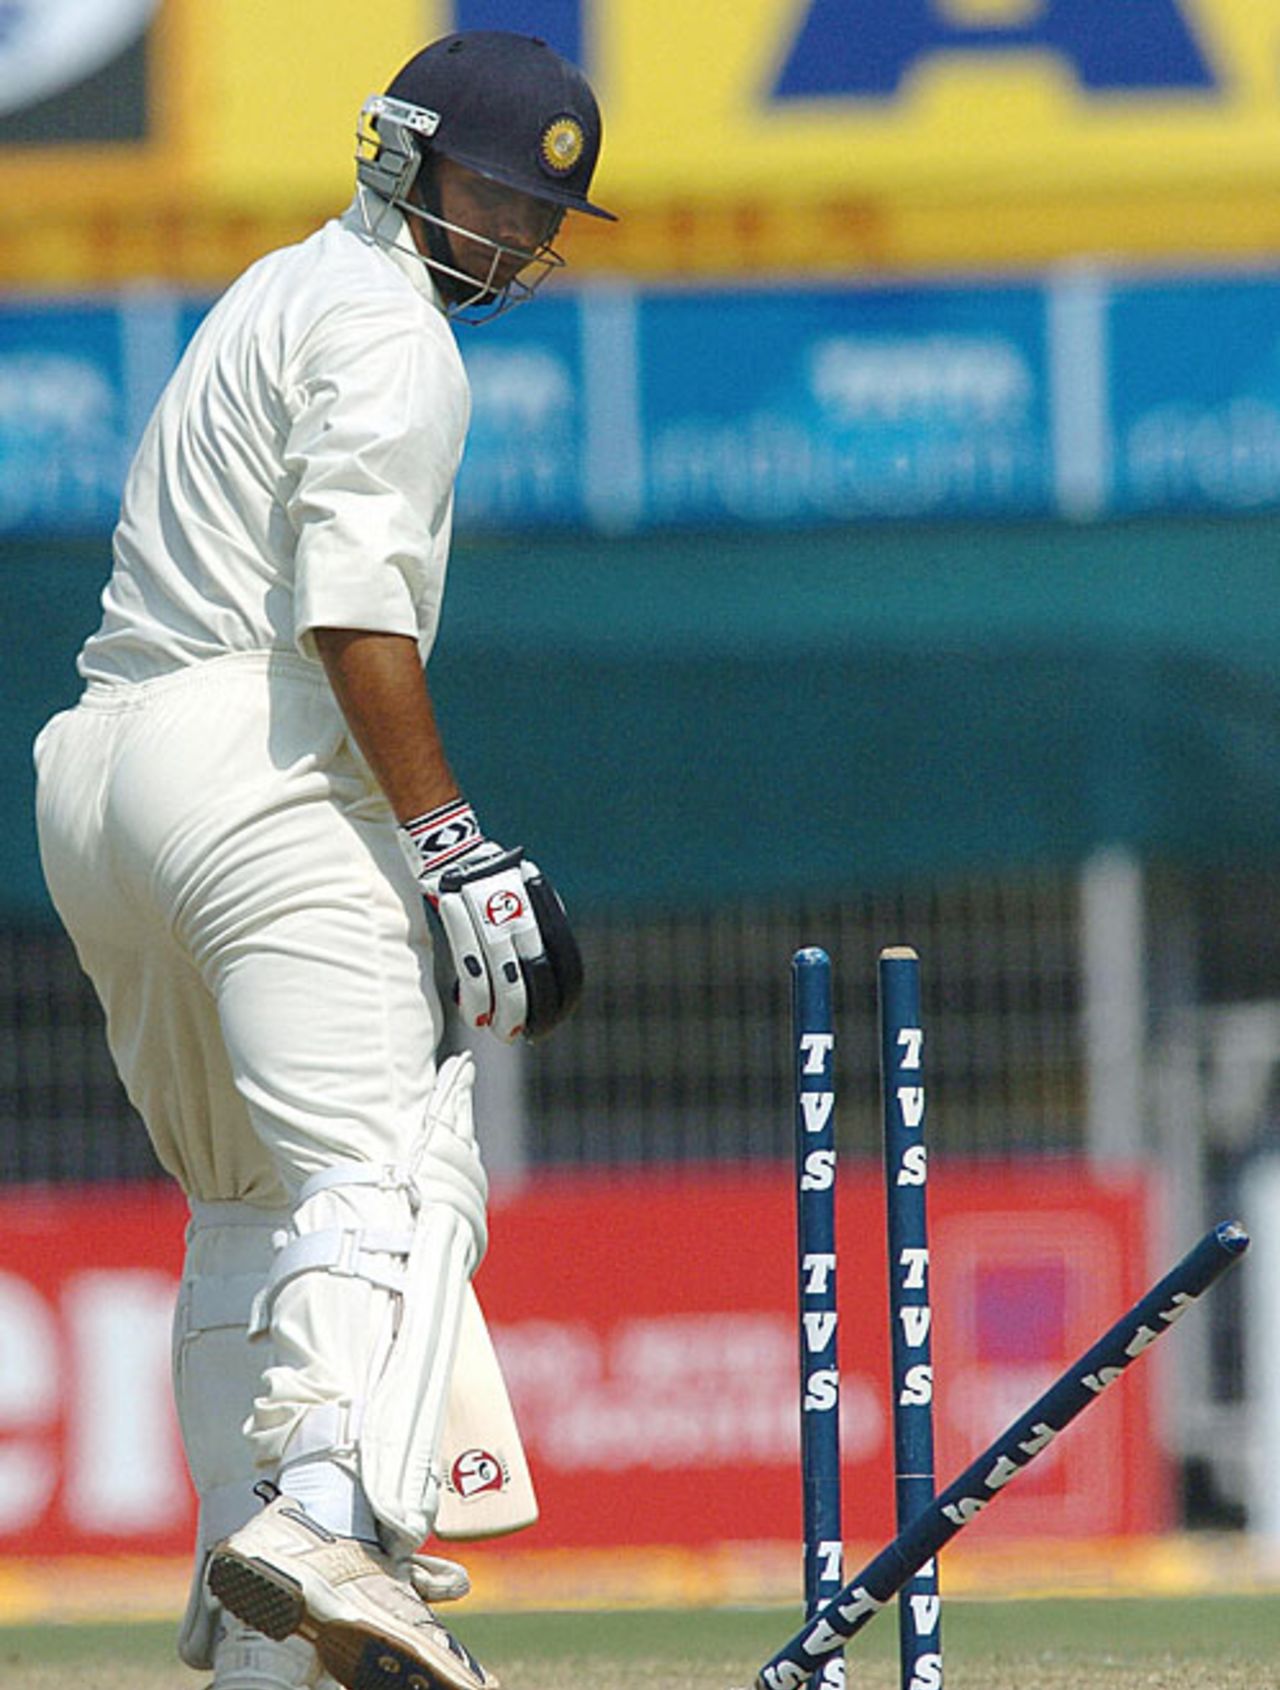 Rahul Dravid examines the wreckage after being bowled, India v Australia, 3rd Test, Nagpur, 4th day, October 29, 2004